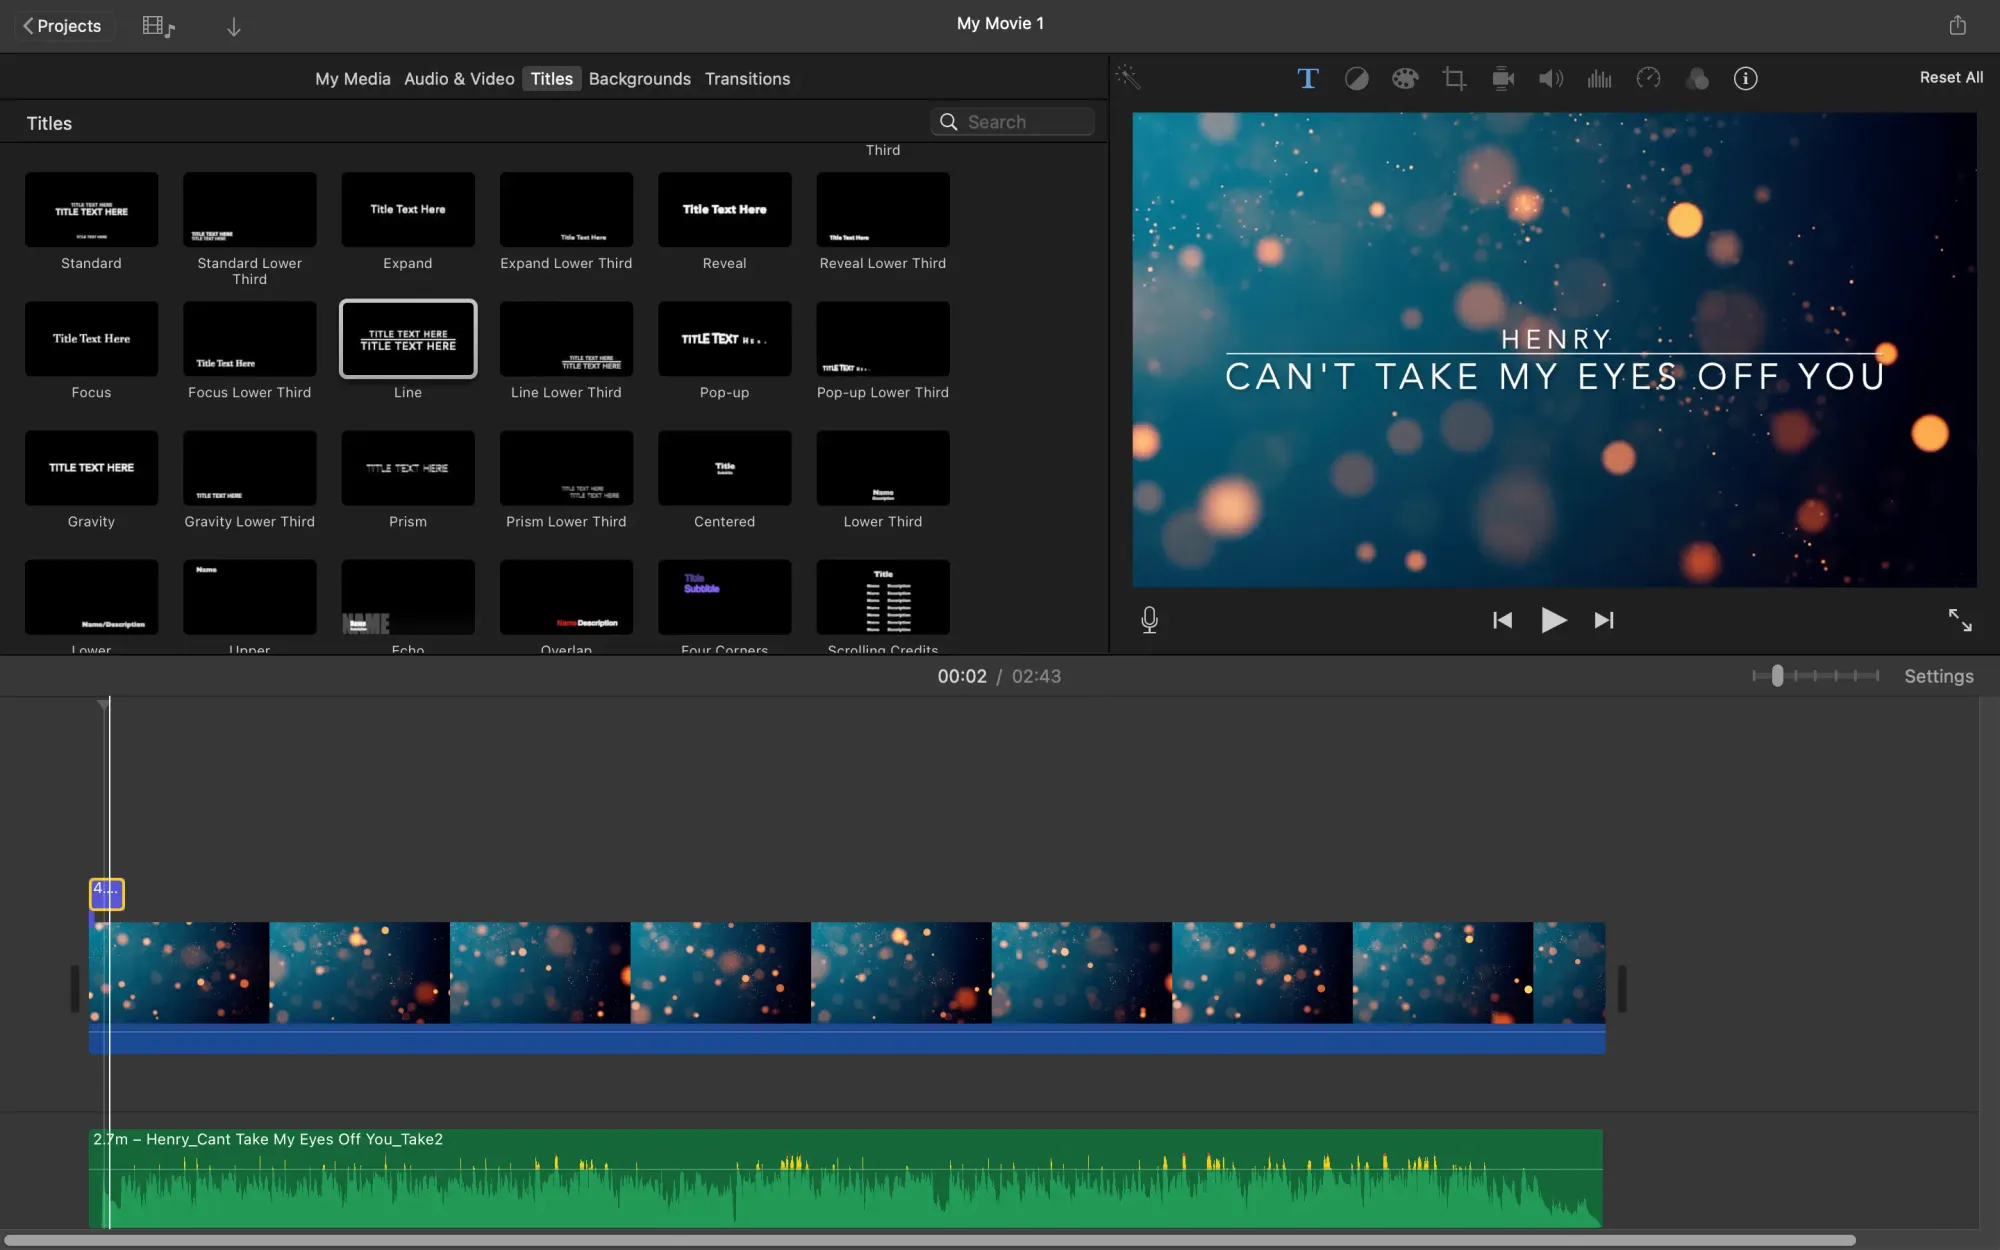 Create Your Own Lyric Video: A Simple Guide for iMovie